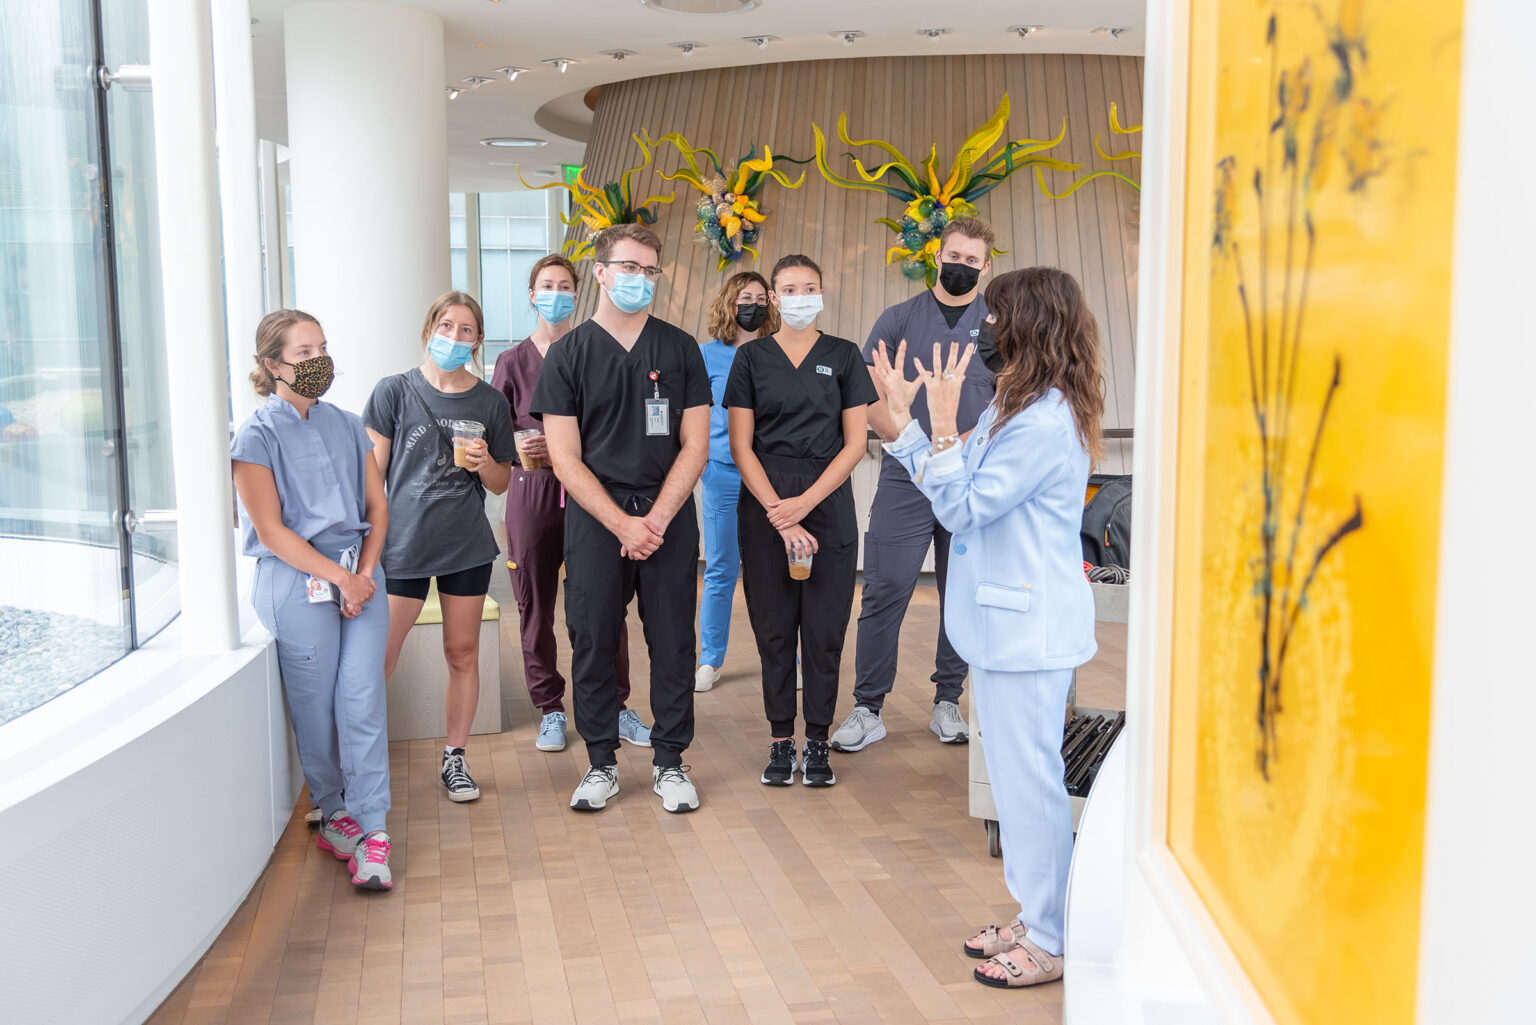 Chihuly Sanctuary lifts PA students to a new perspective Newsroom